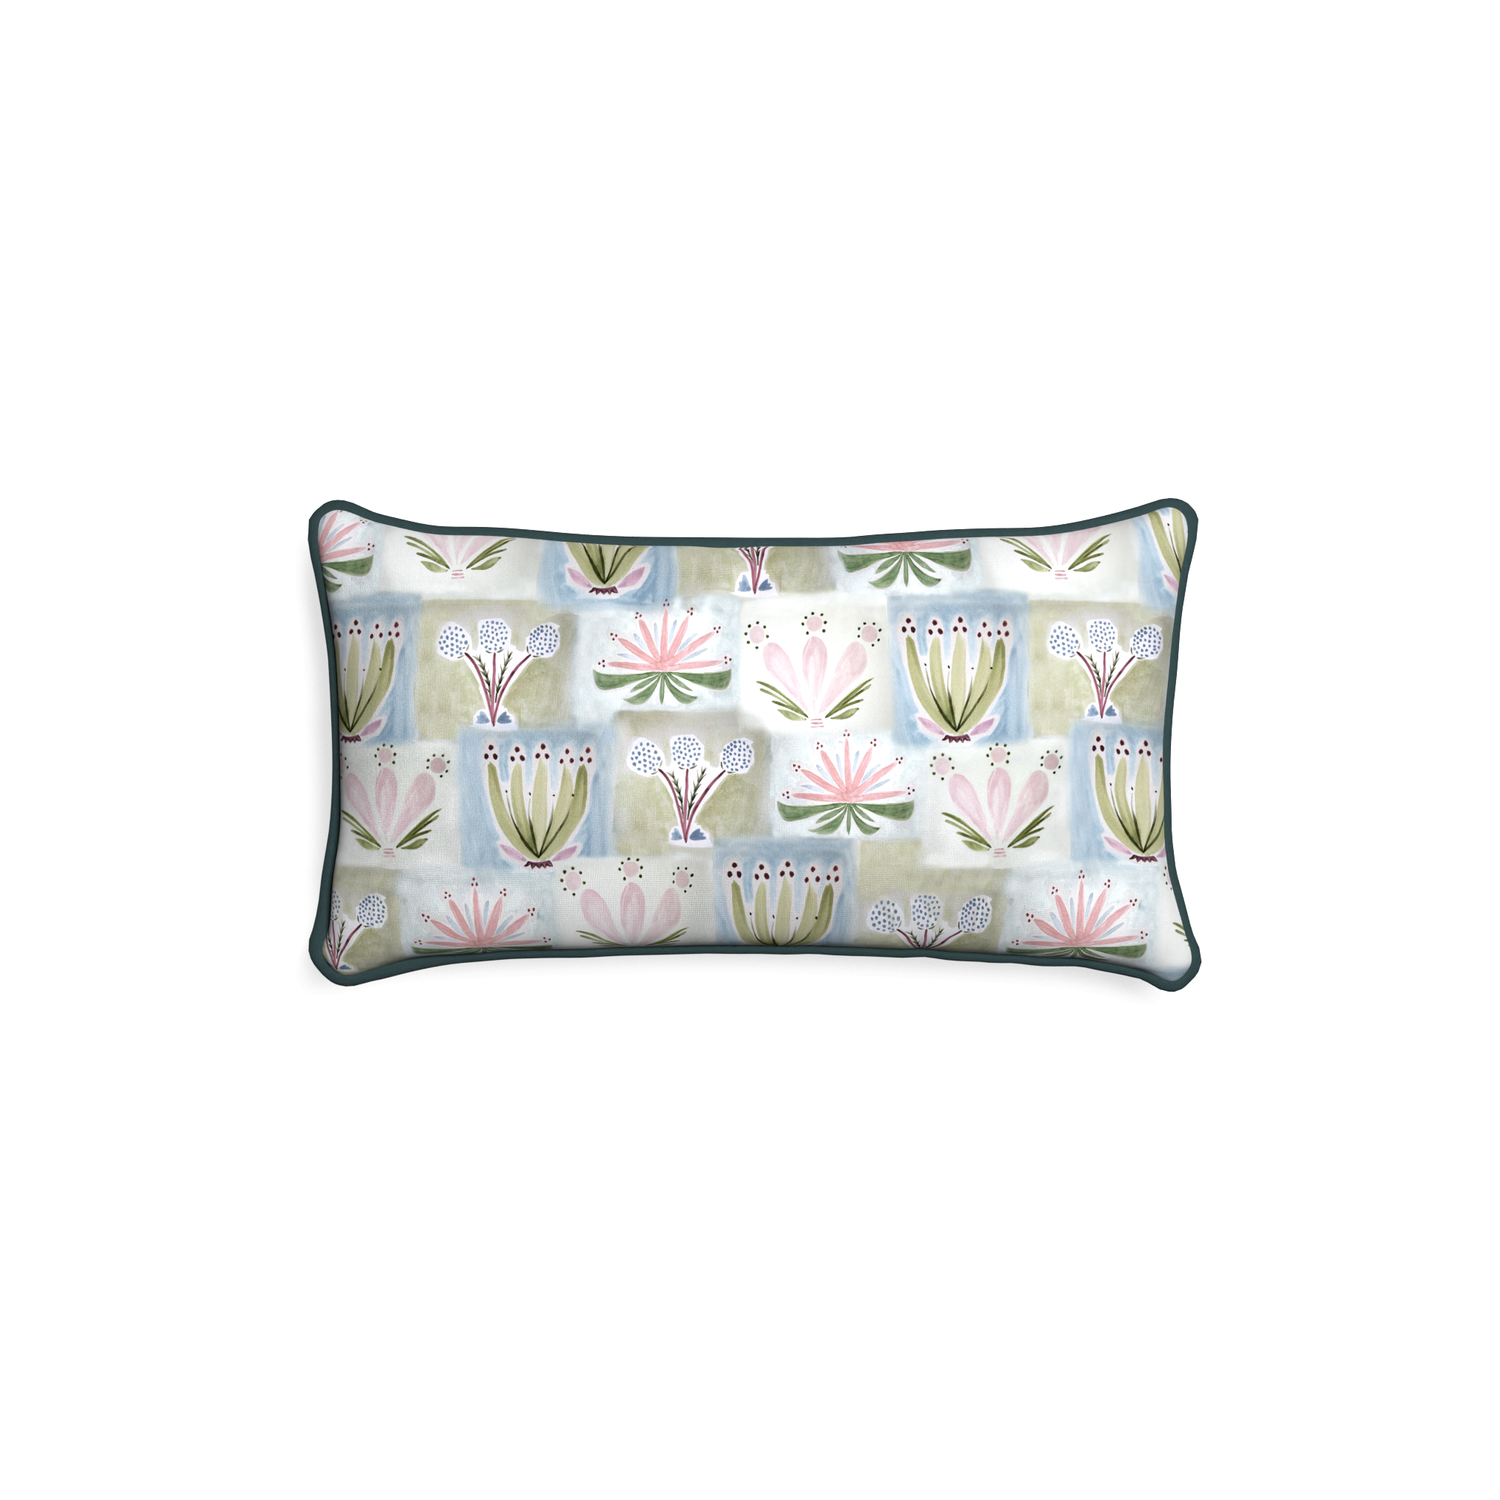 Petite-lumbar harper custom hand-painted floralpillow with p piping on white background